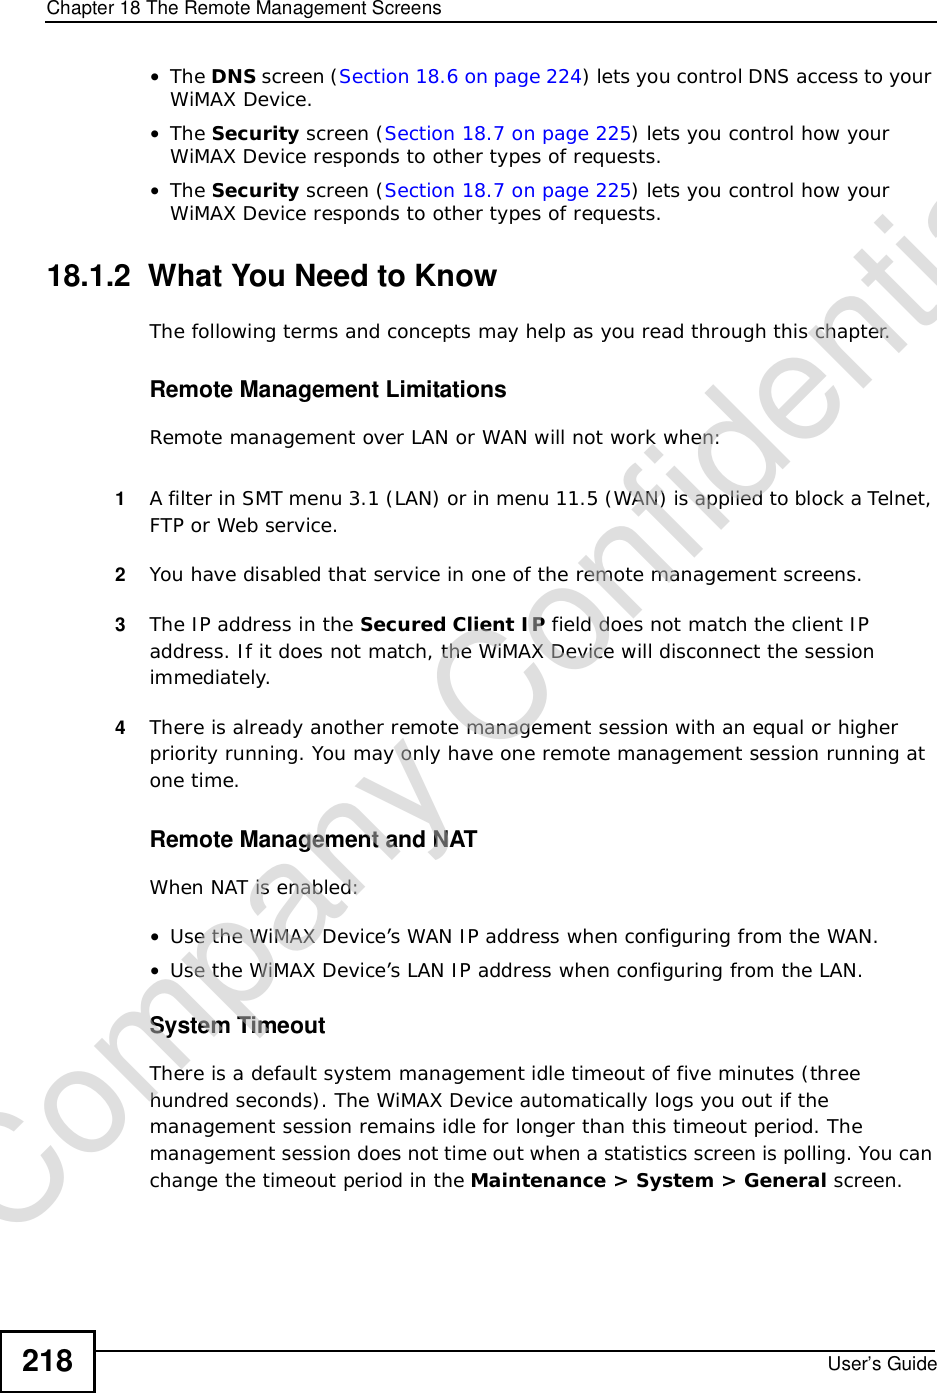 Chapter 18The Remote Management ScreensUser’s Guide218•The DNS screen (Section 18.6 on page 224) lets you control DNS access to your WiMAX Device.•The Security screen (Section 18.7 on page 225) lets you control how your WiMAX Device responds to other types of requests.•The Security screen (Section 18.7 on page 225) lets you control how your WiMAX Device responds to other types of requests.18.1.2  What You Need to KnowThe following terms and concepts may help as you read through this chapter.Remote Management LimitationsRemote management over LAN or WAN will not work when:1A filter in SMT menu 3.1 (LAN) or in menu 11.5 (WAN) is applied to block a Telnet, FTP or Web service. 2You have disabled that service in one of the remote management screens.3The IP address in the Secured Client IP field does not match the client IP address. If it does not match, the WiMAX Device will disconnect the session immediately.4There is already another remote management session with an equal or higher priority running. You may only have one remote management session running at one time.Remote Management and NATWhen NAT is enabled:•Use the WiMAX Device’s WAN IP address when configuring from the WAN. •Use the WiMAX Device’s LAN IP address when configuring from the LAN.System TimeoutThere is a default system management idle timeout of five minutes (three hundred seconds). The WiMAX Device automatically logs you out if the management session remains idle for longer than this timeout period. The management session does not time out when a statistics screen is polling. You can change the timeout period in the Maintenance &gt; System &gt; General screen.Company Confidential